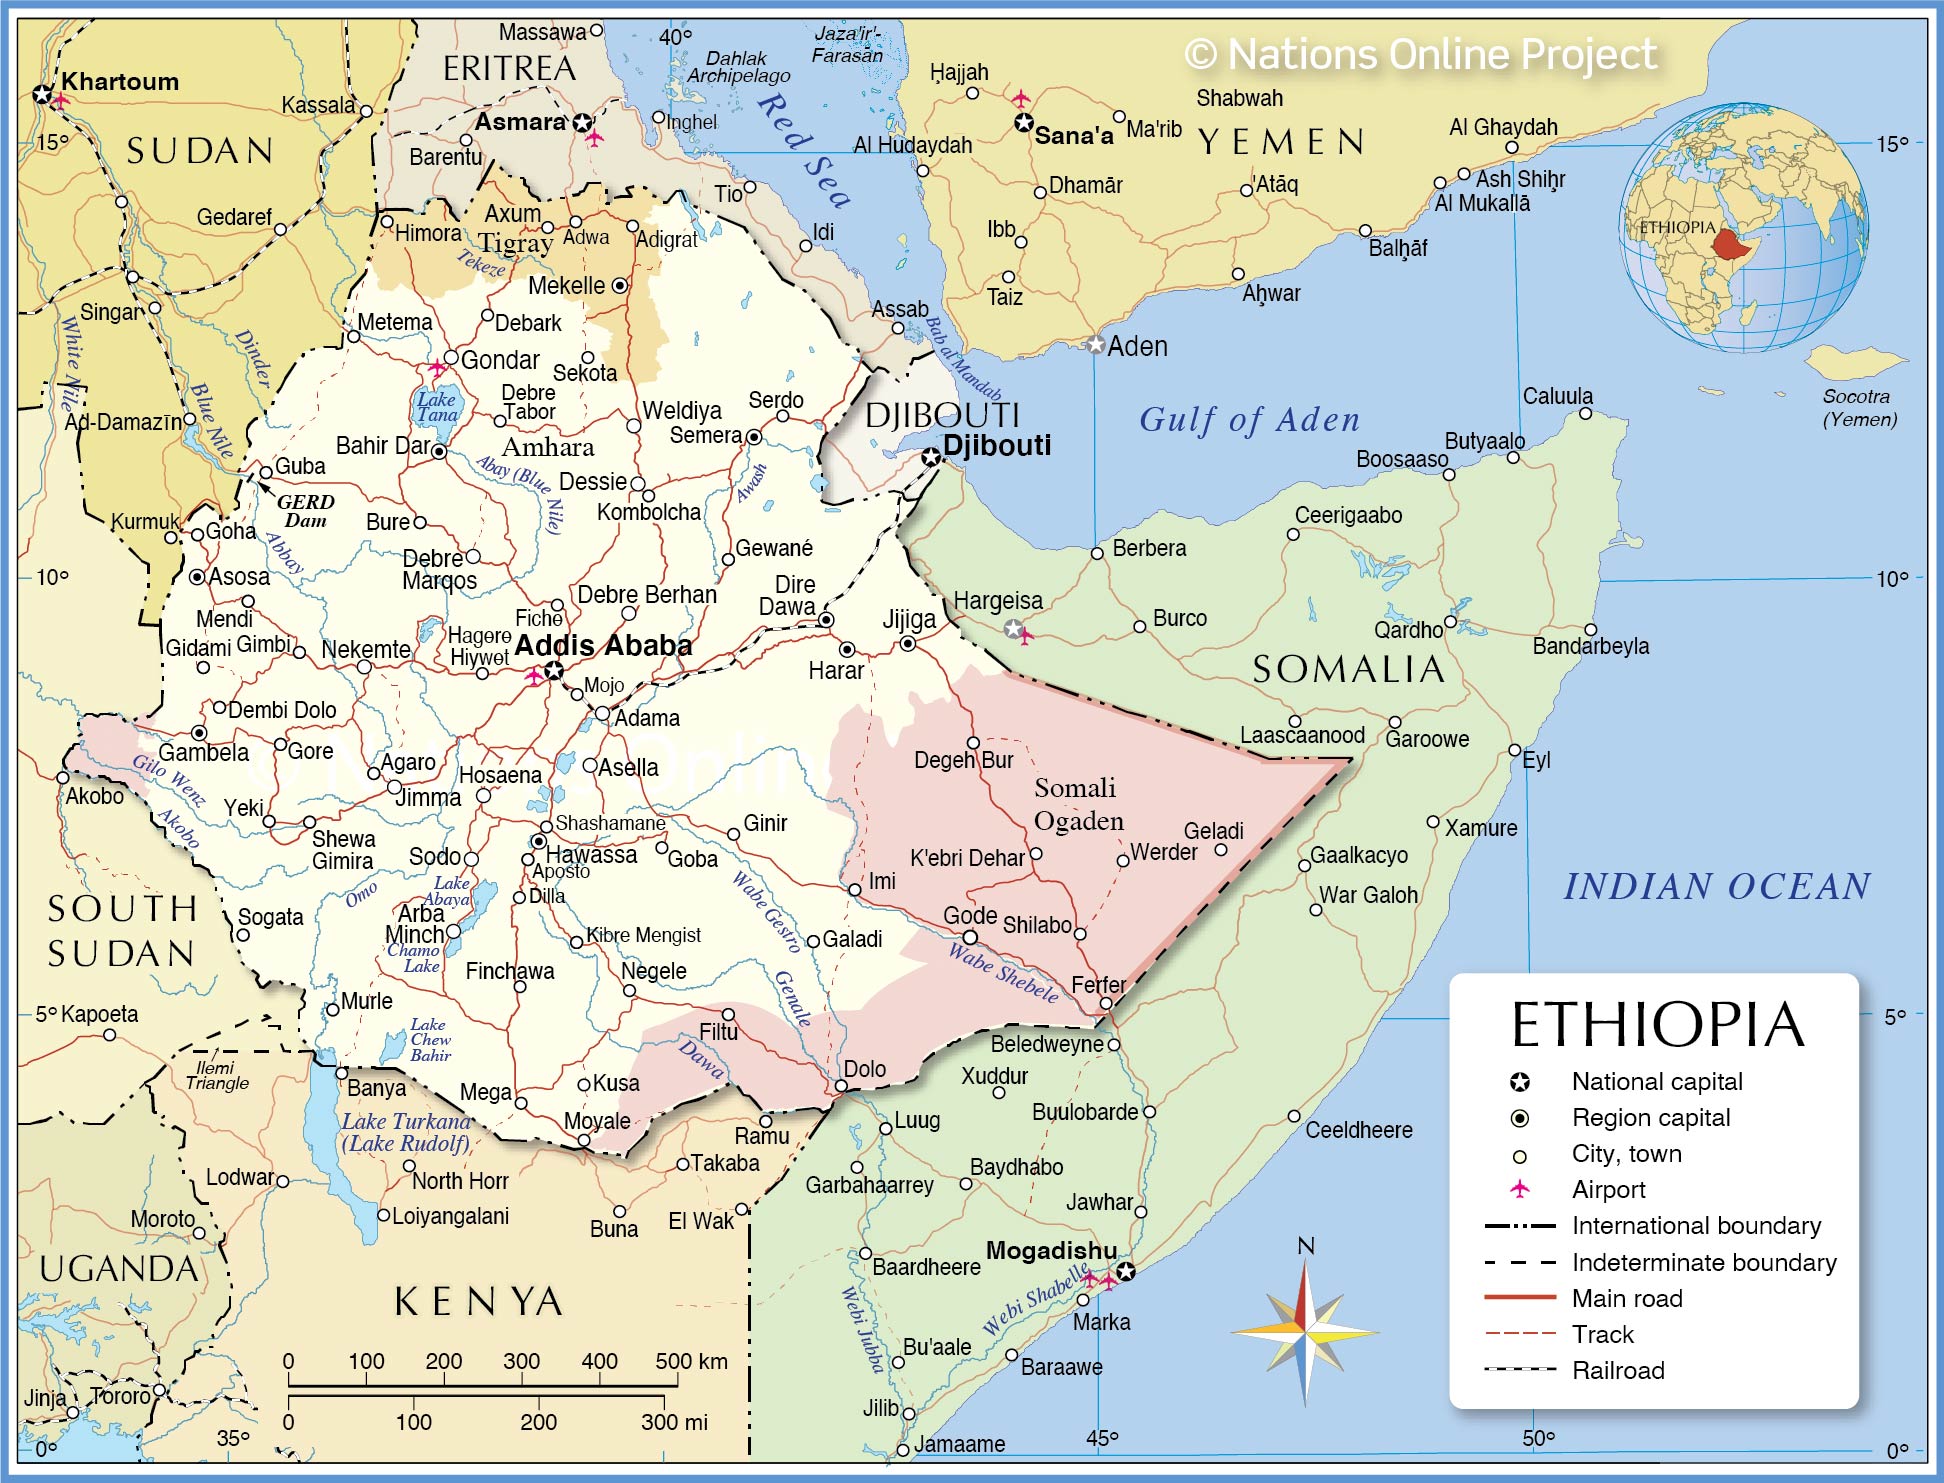 Political Map of Ethiopia with international borders, the national capital Addis Ababa, region capitals, major cities, main roads, railroads, and major airports